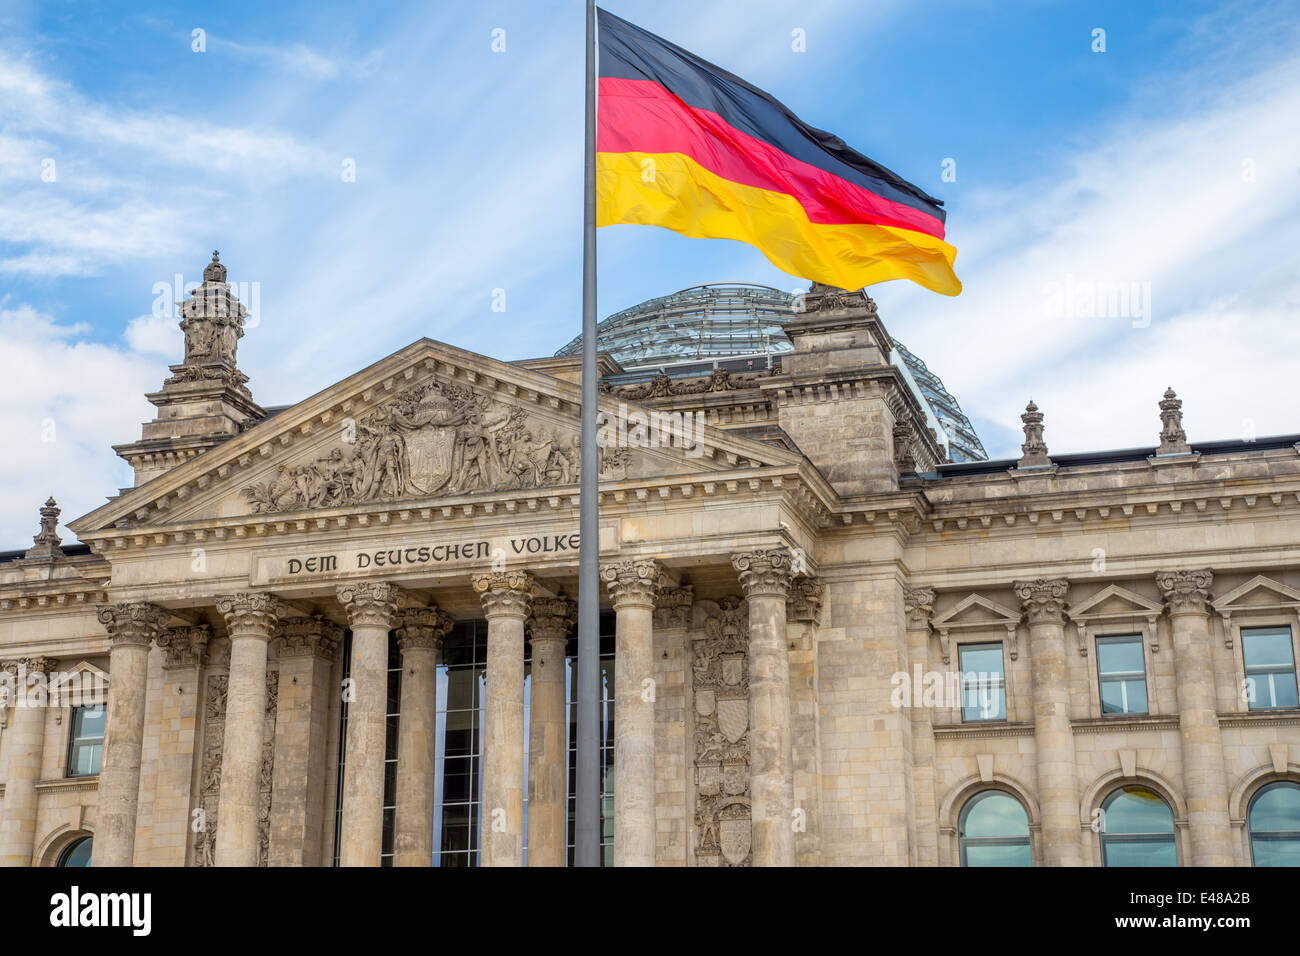 Reichstag parliament building, Berlin, Germany Stock Photo